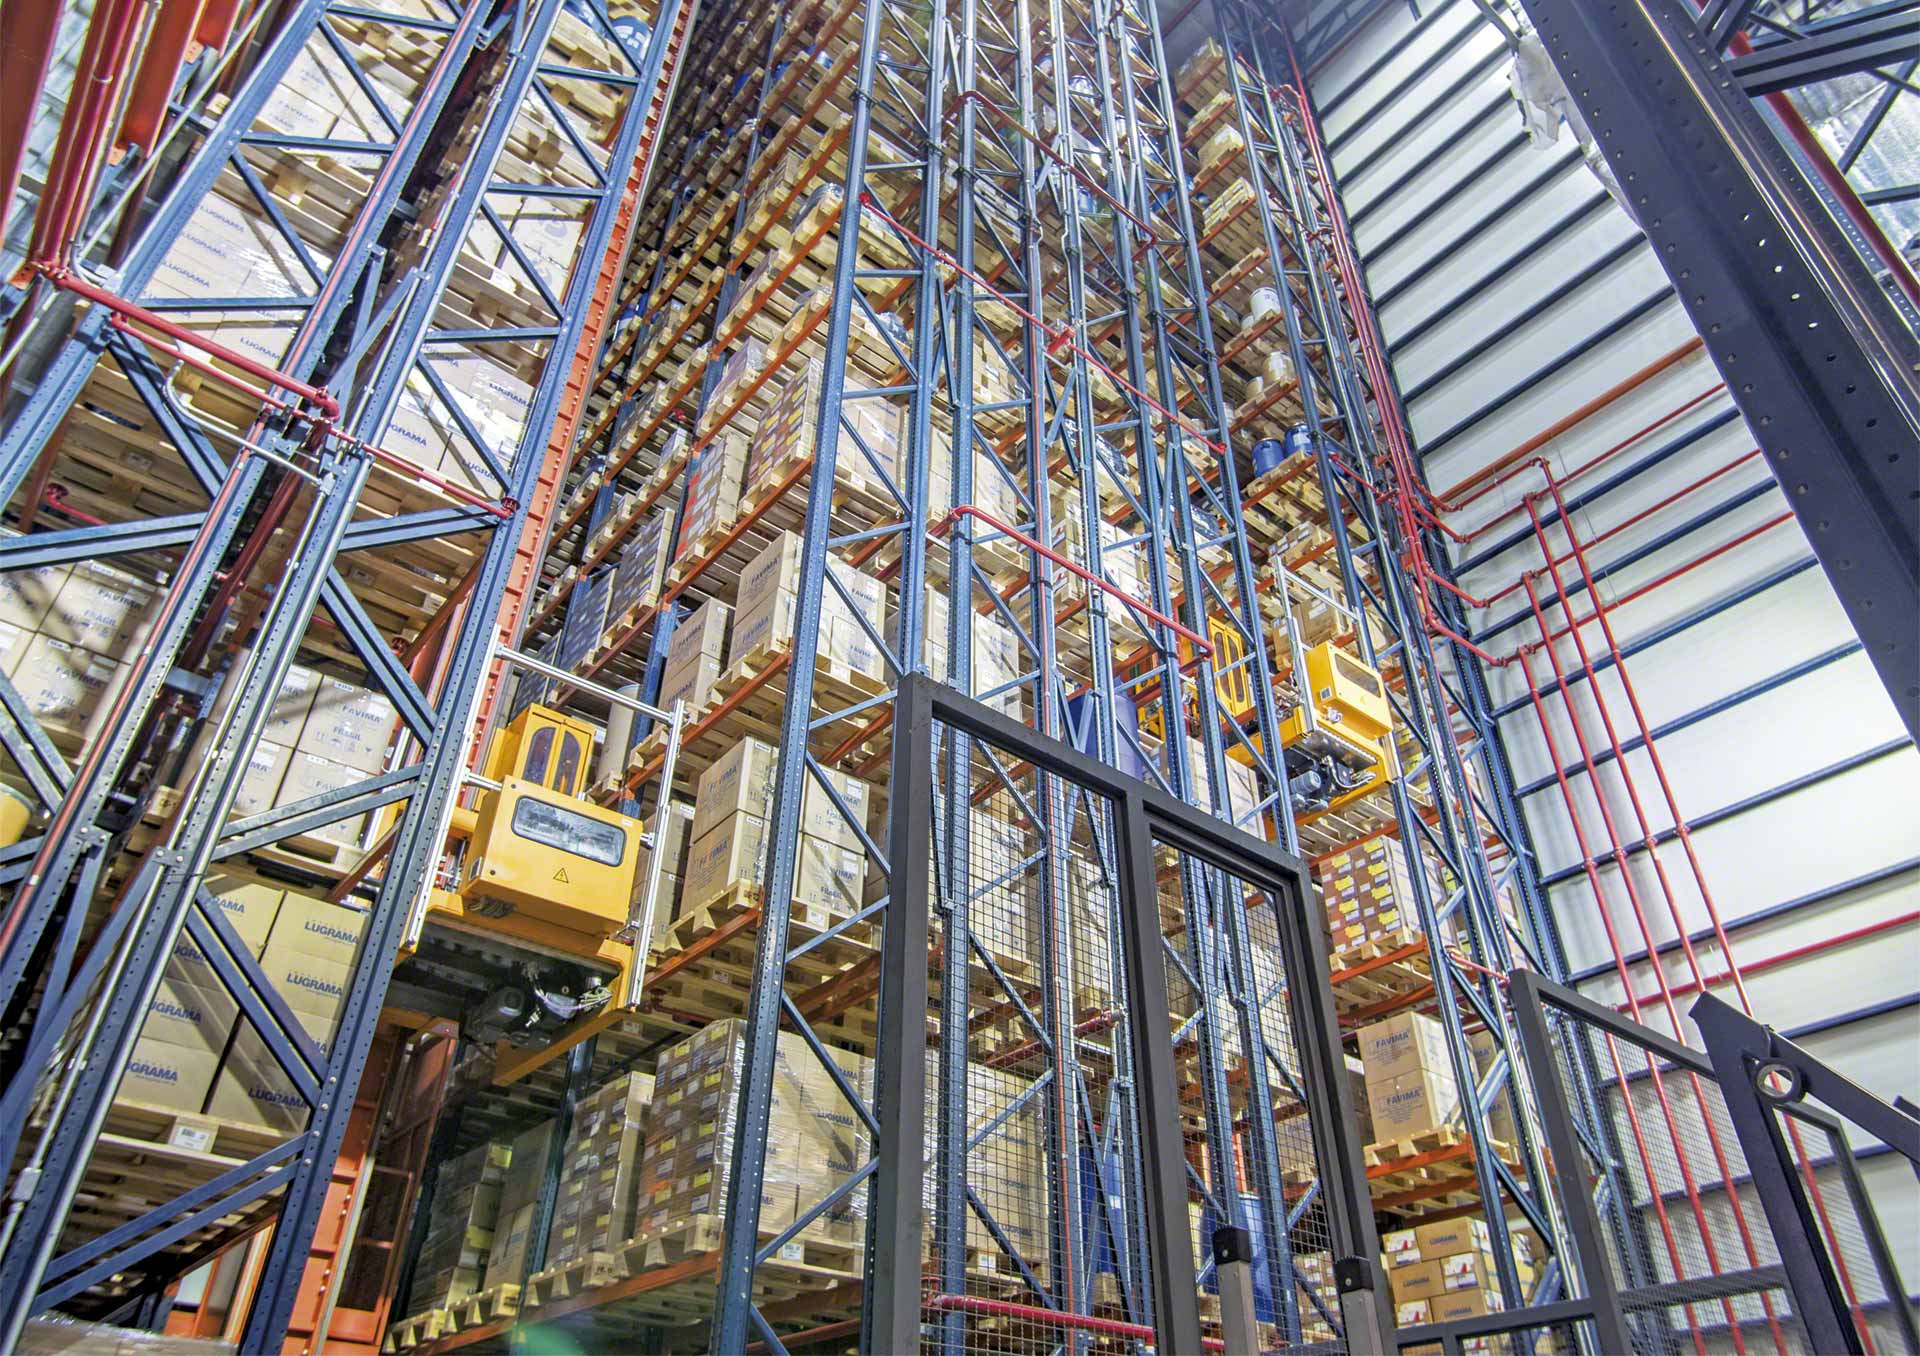 Stacker cranes: which type is best for your warehouse?